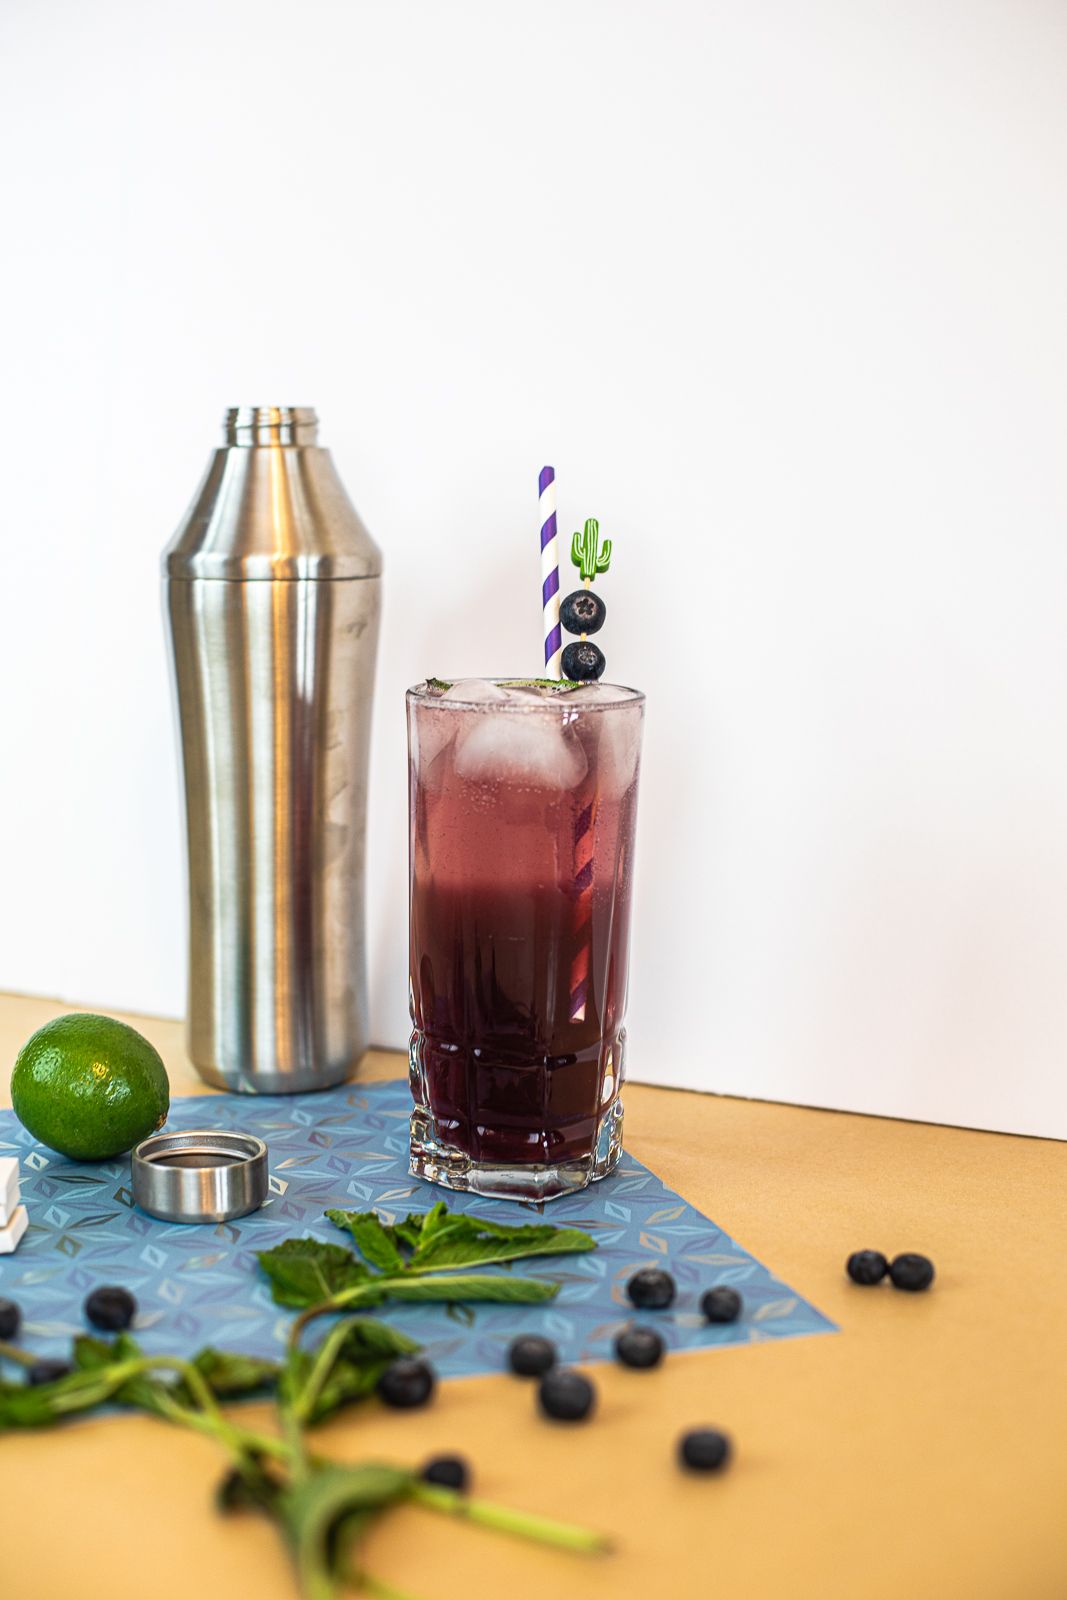 Shaker cup, cocktail, lime, mint, and blueberries shown. 